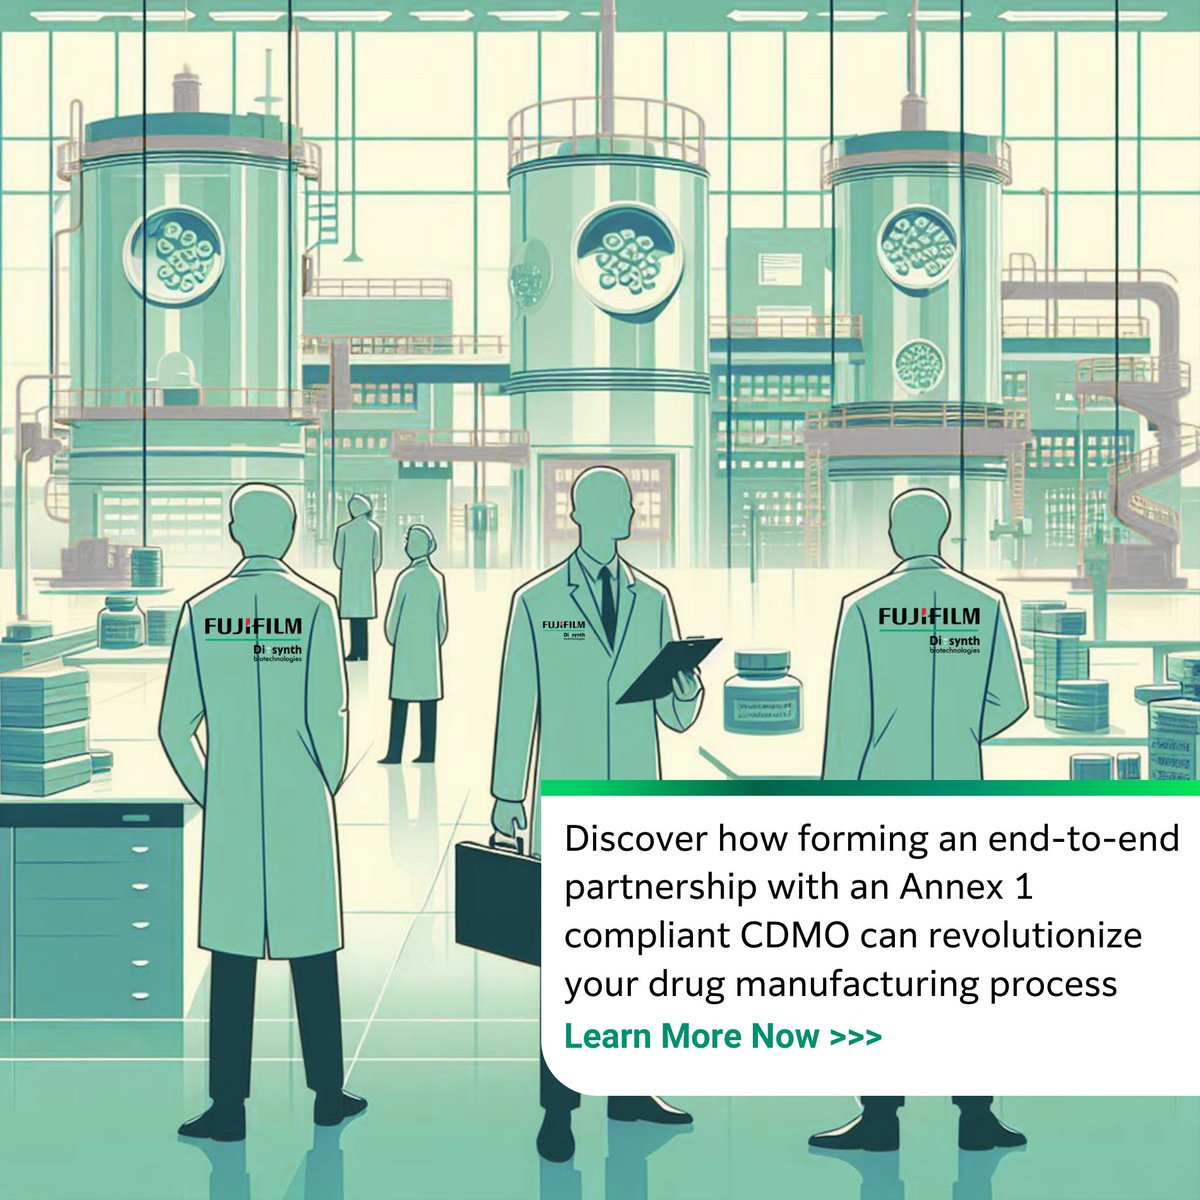 Our latest blog post dives into the transformative potential of forging an end-to-end partnership with an Annex 1 compliant CDMO. Discover how this collaboration can revolutionize your drug manufacturing process: ow.ly/8QHV50QE2Uf #CDMO #DrugManufacturing